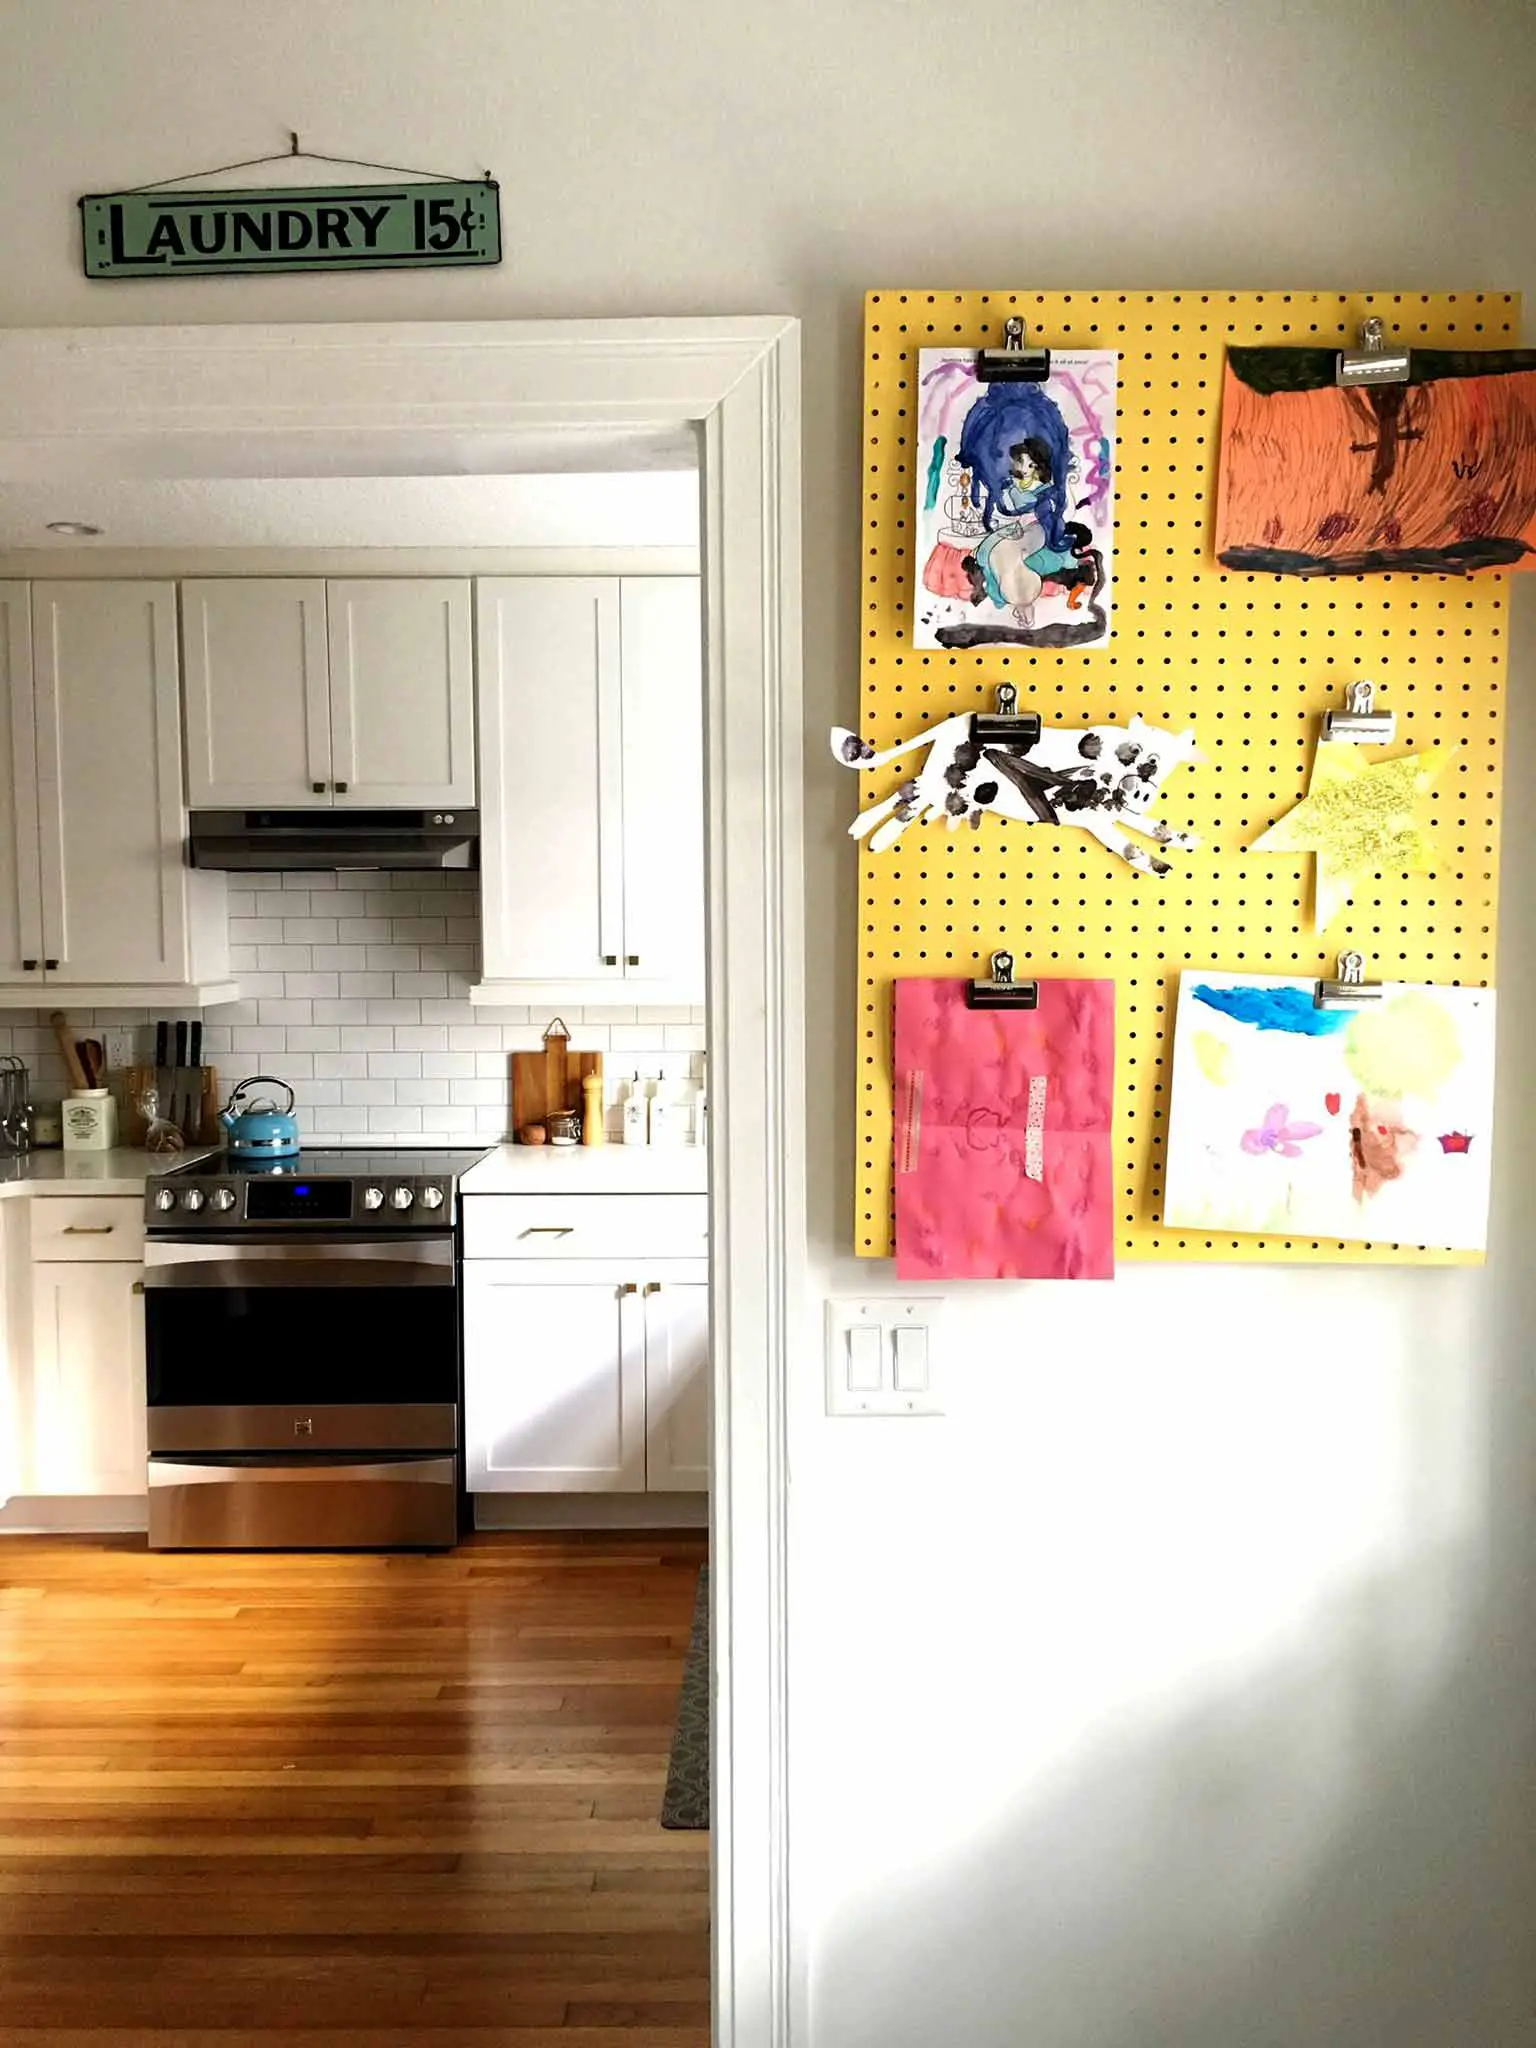 Pegboard display board - 4 simple steps to keeping your kids' artwork organized - That Homebird Life Blog